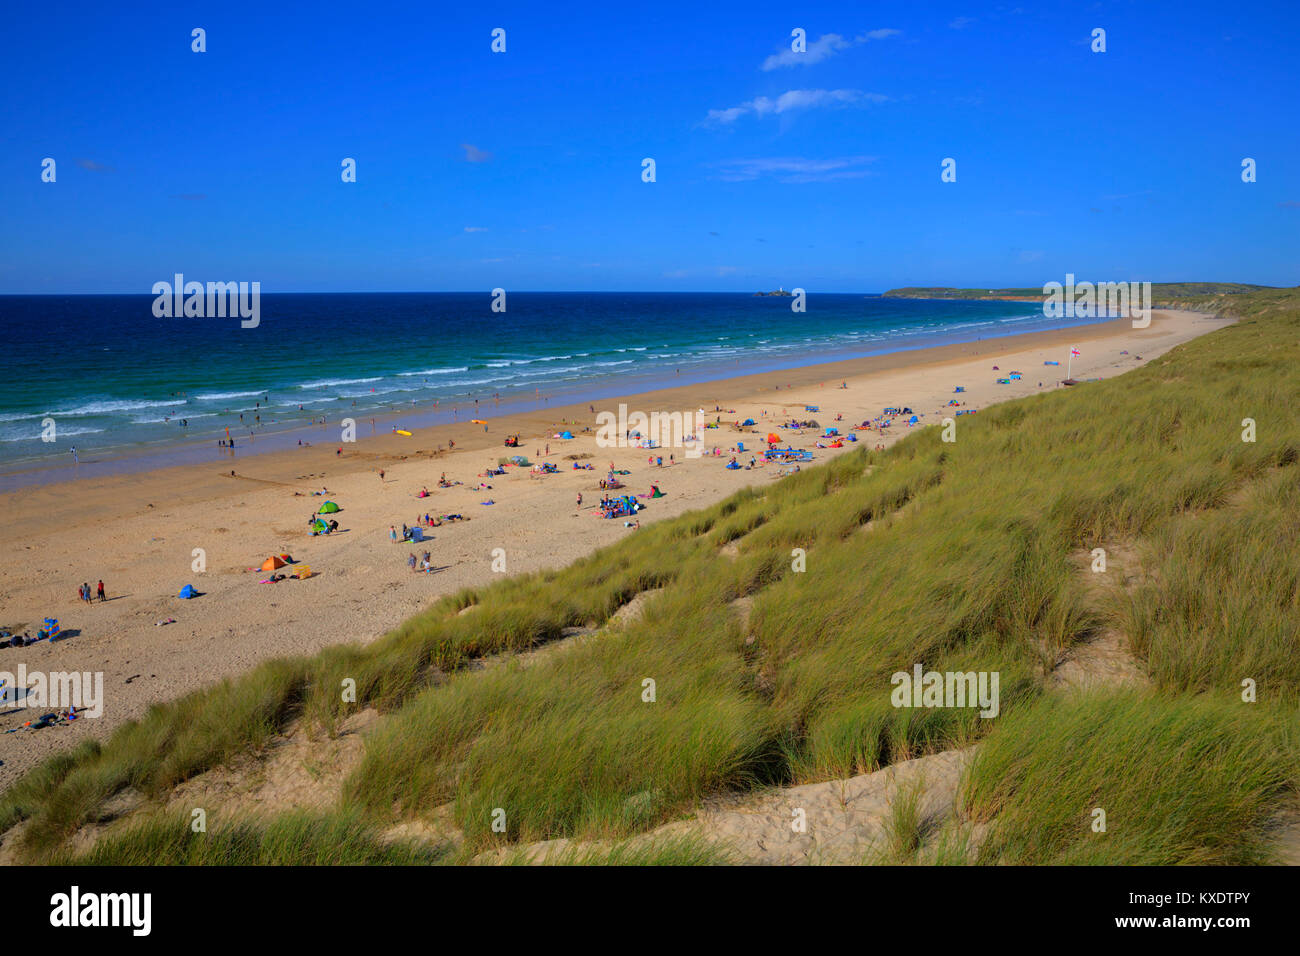 St Ives Bay beach Cornwall uk in summer with people blue sky and sea, view towards Godrevy lighthouse Stock Photo